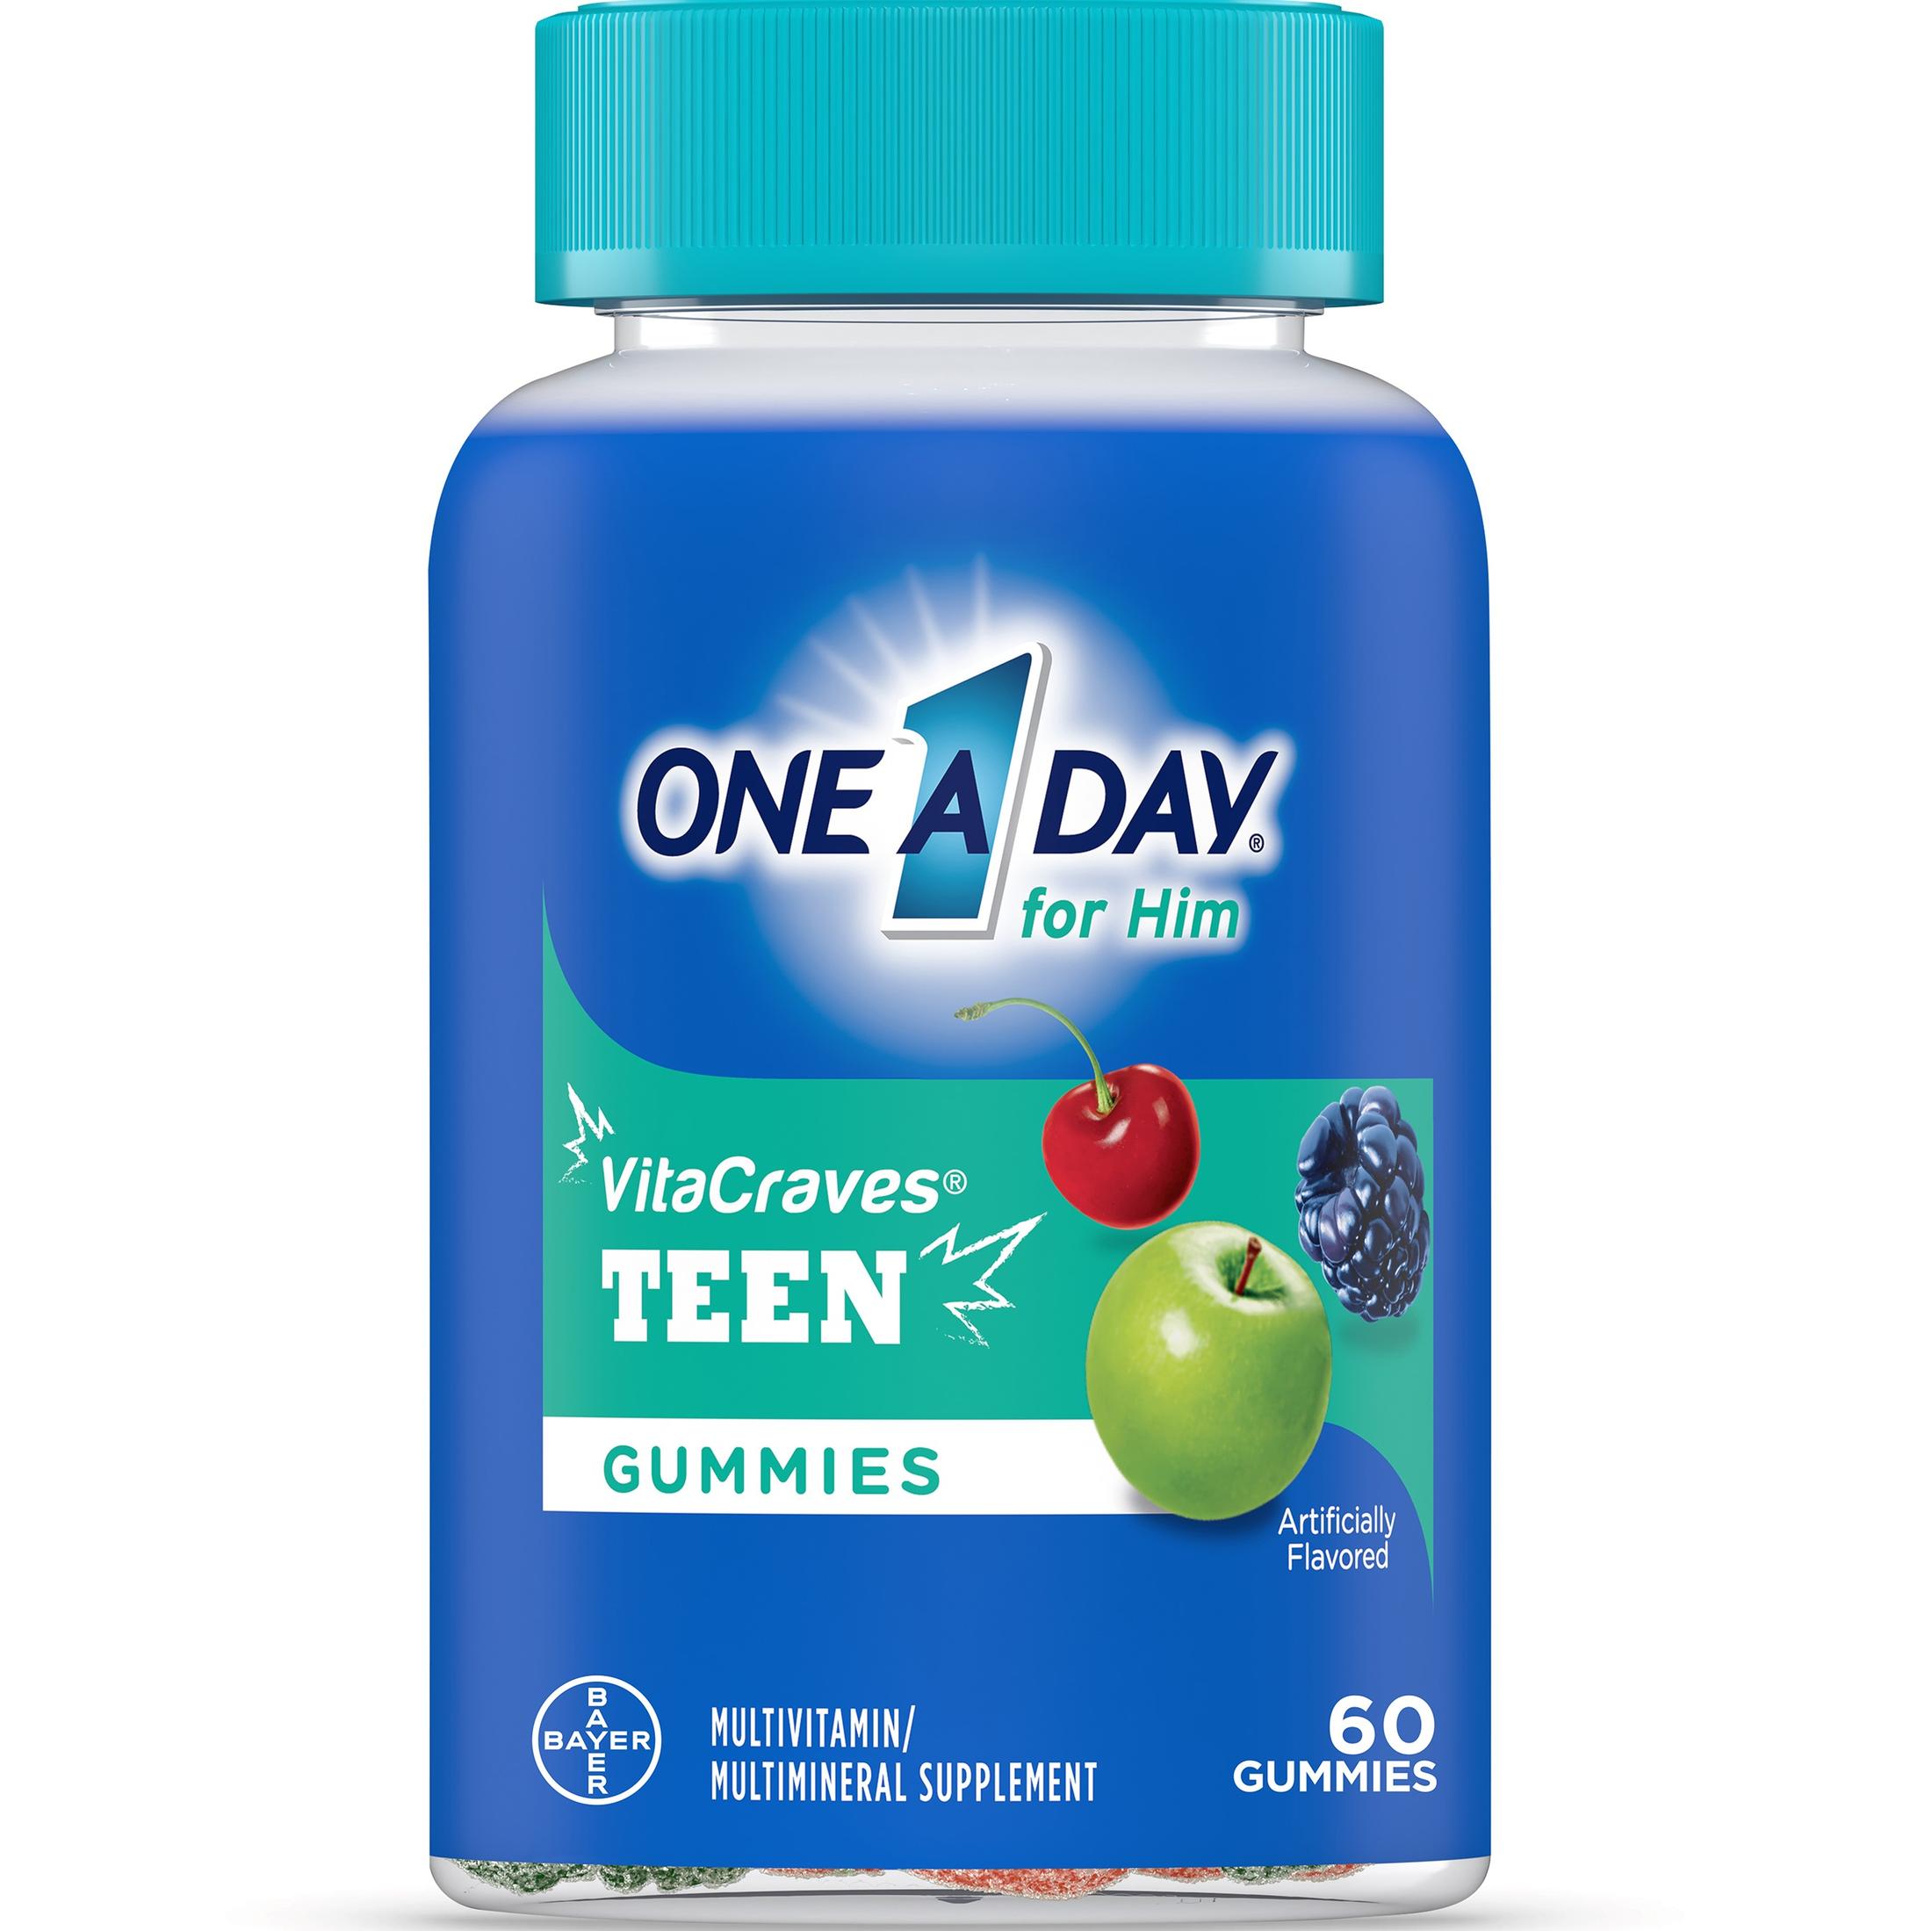 One A Day Teen For Him Multivitamin Gummies, 60 Count - image 1 of 8